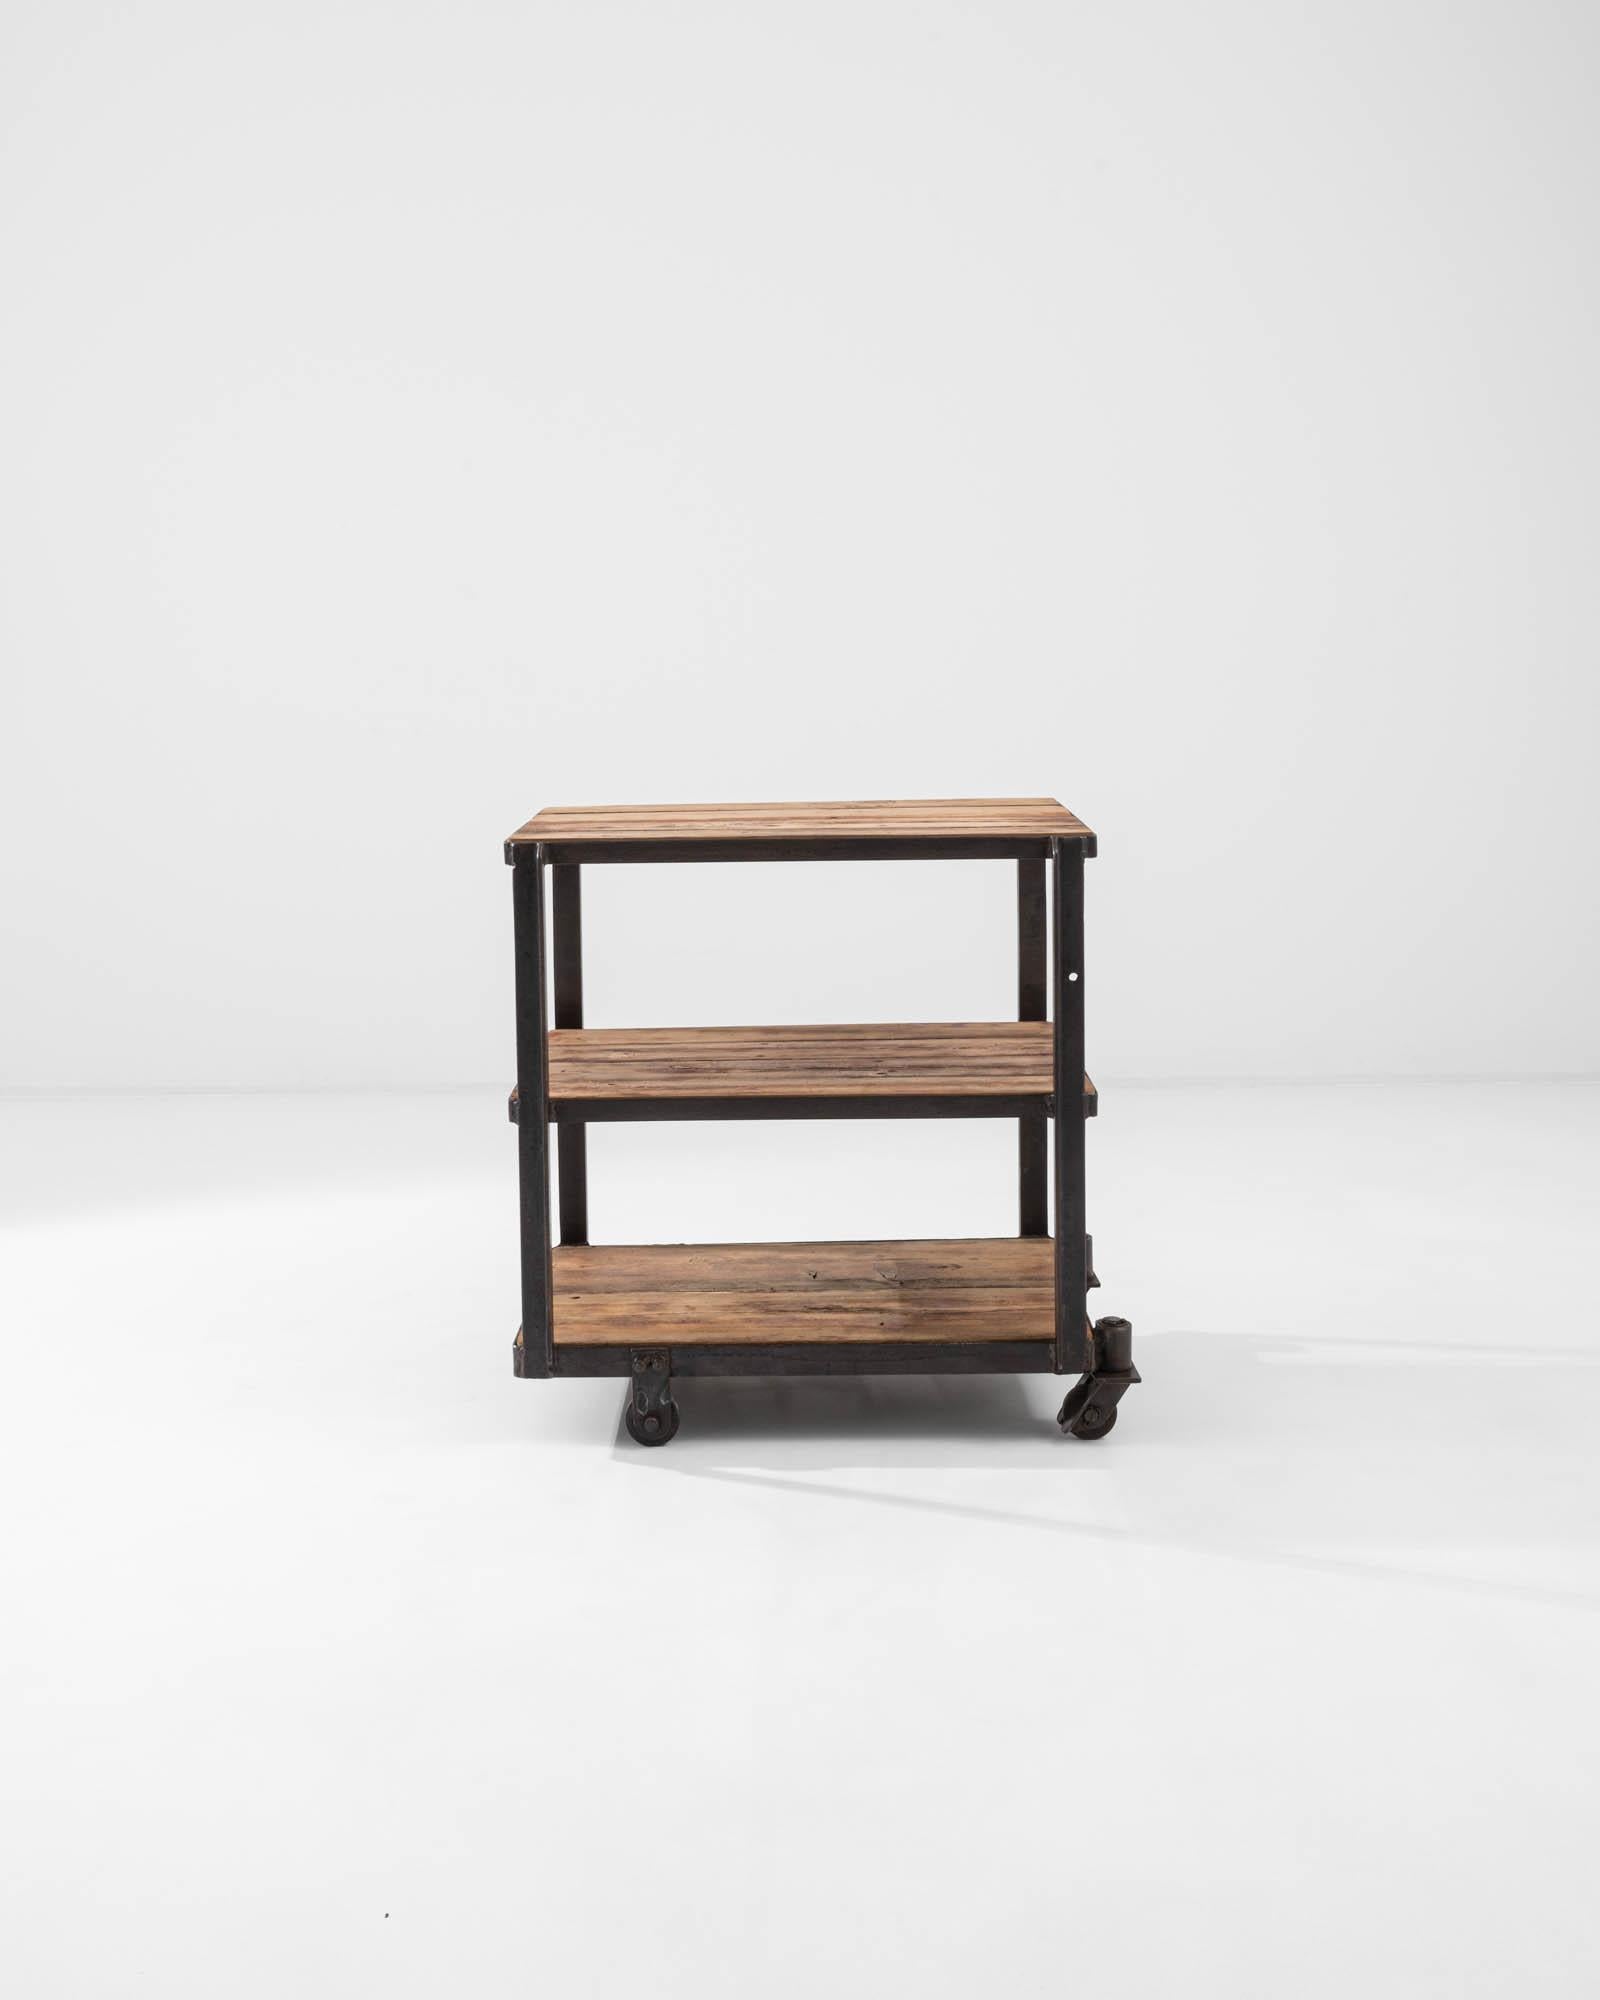 Robust and versatile, this vintage Industrial storage unit combines a pragmatic design with a warm patina. Made in France in the 20th century, a trio of spacious wooden shelves are held within a right-angled iron frame. The metal has weathered to a